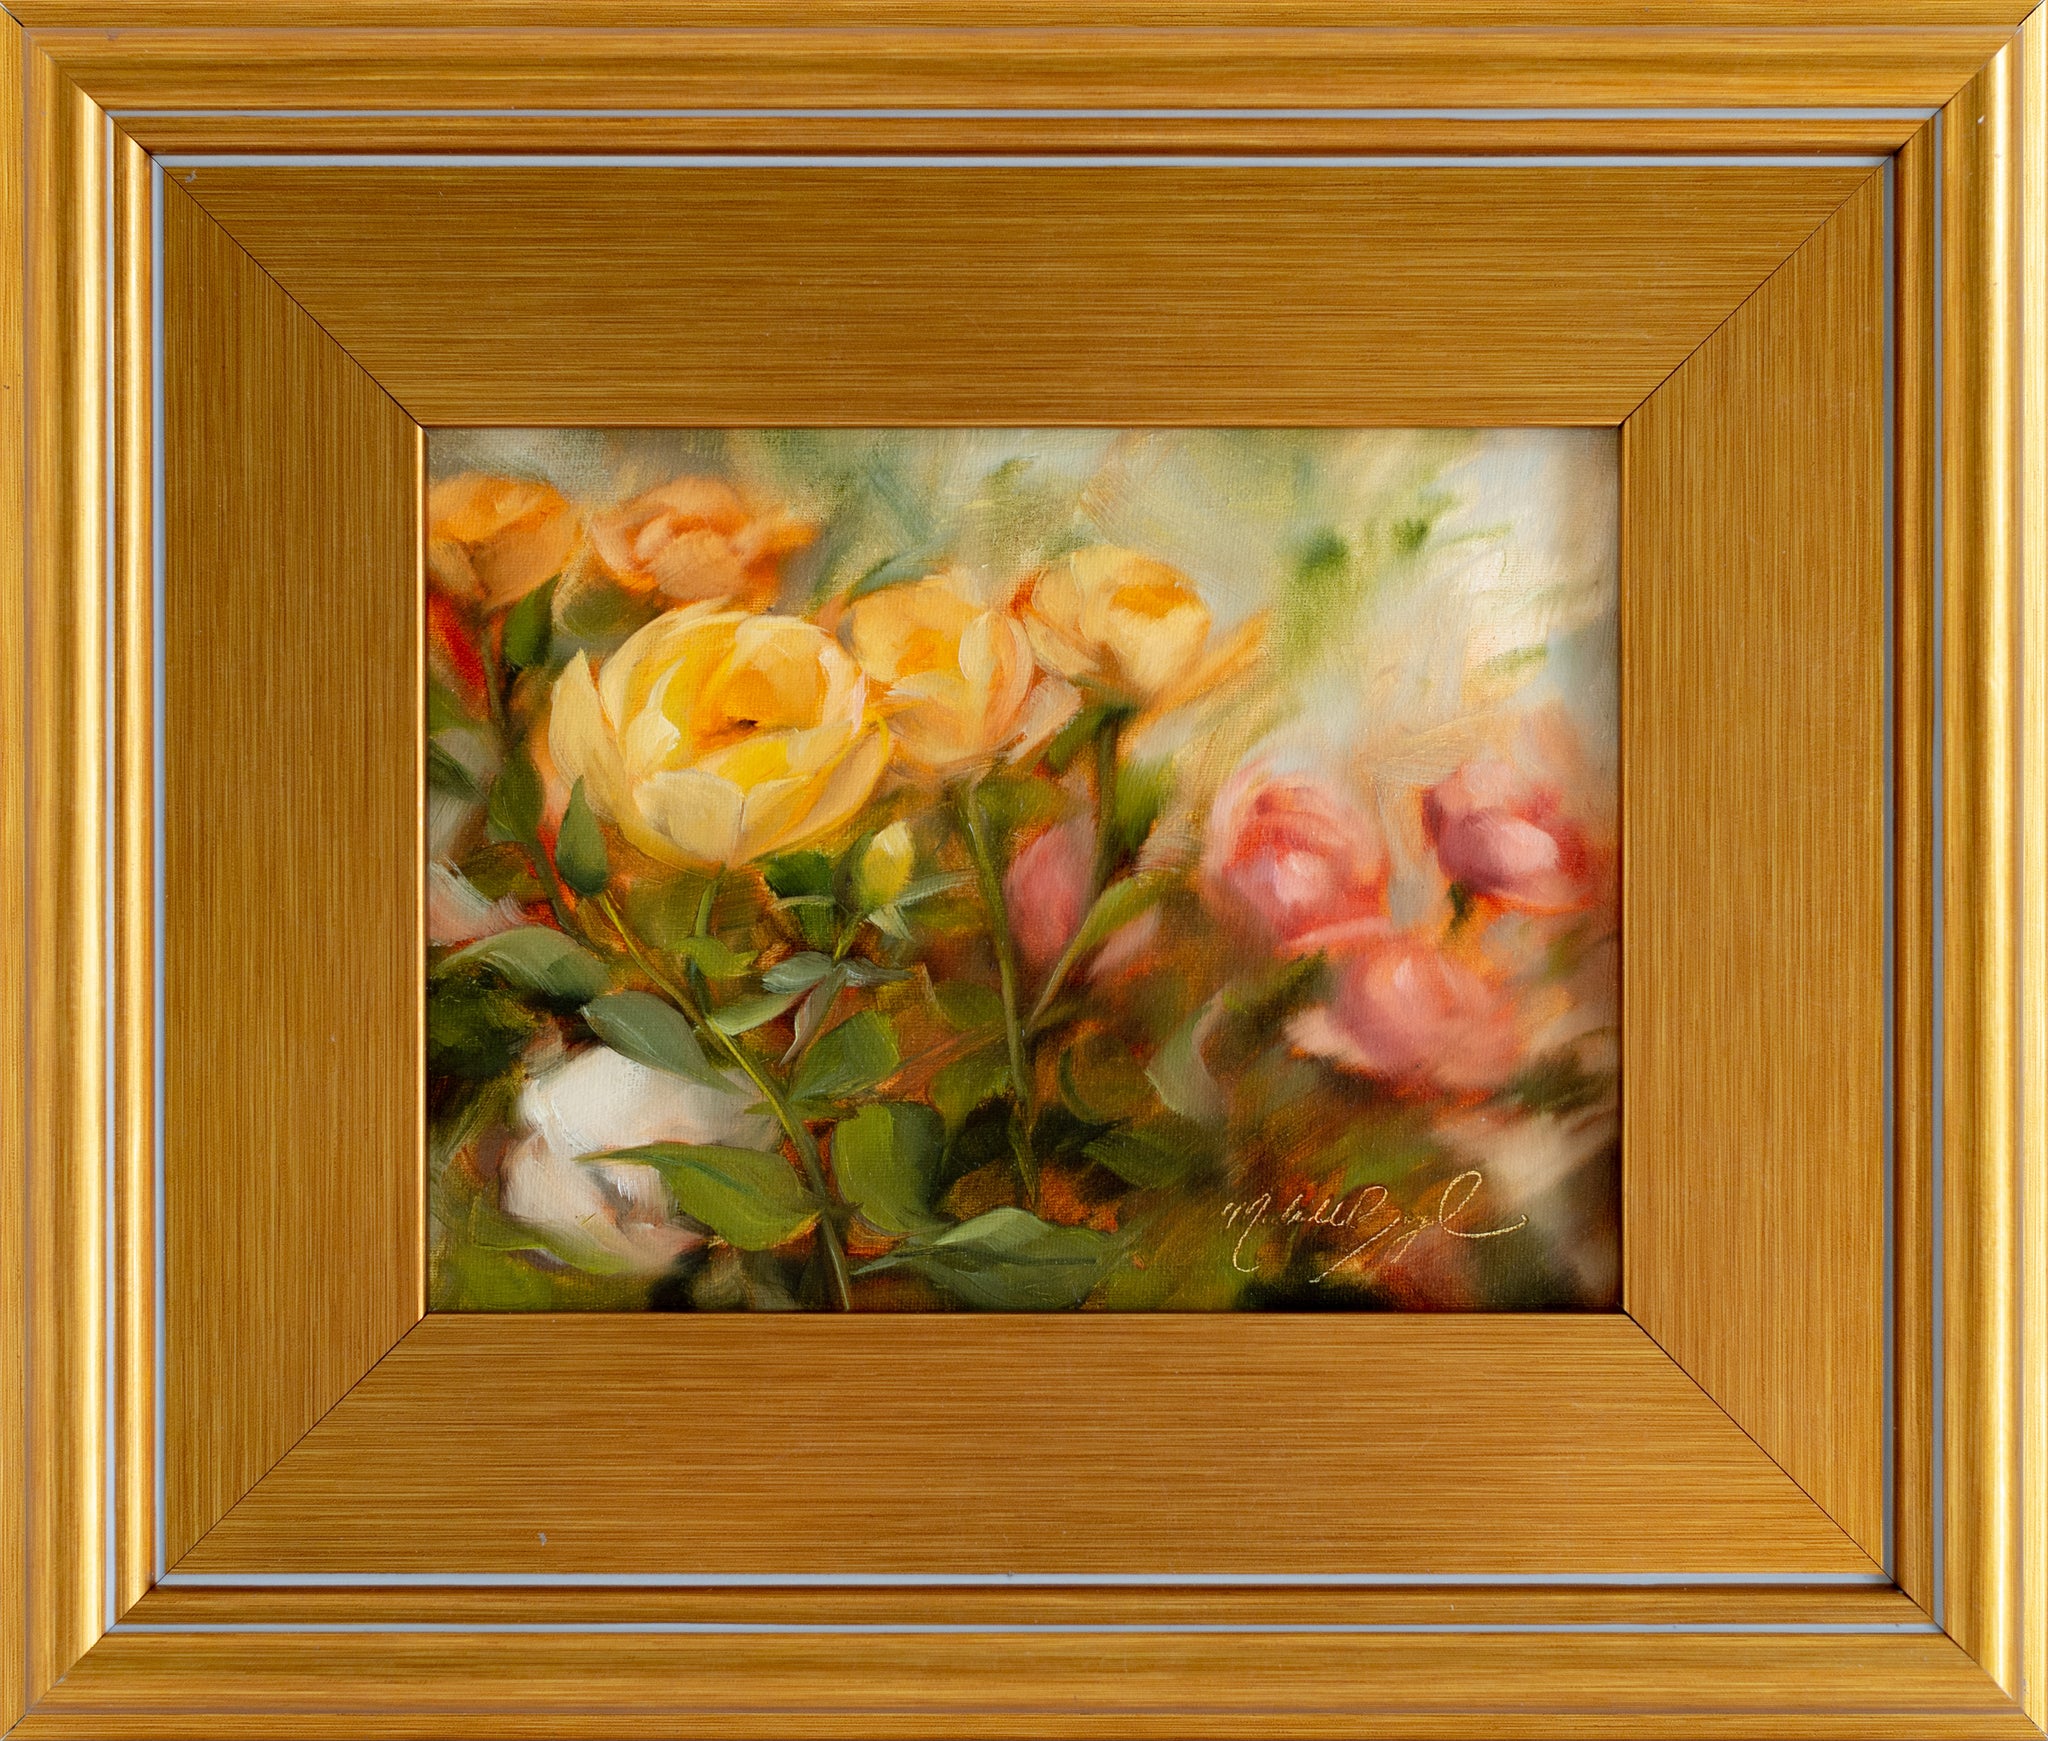 Content - 6x8" Framed Oil Painting